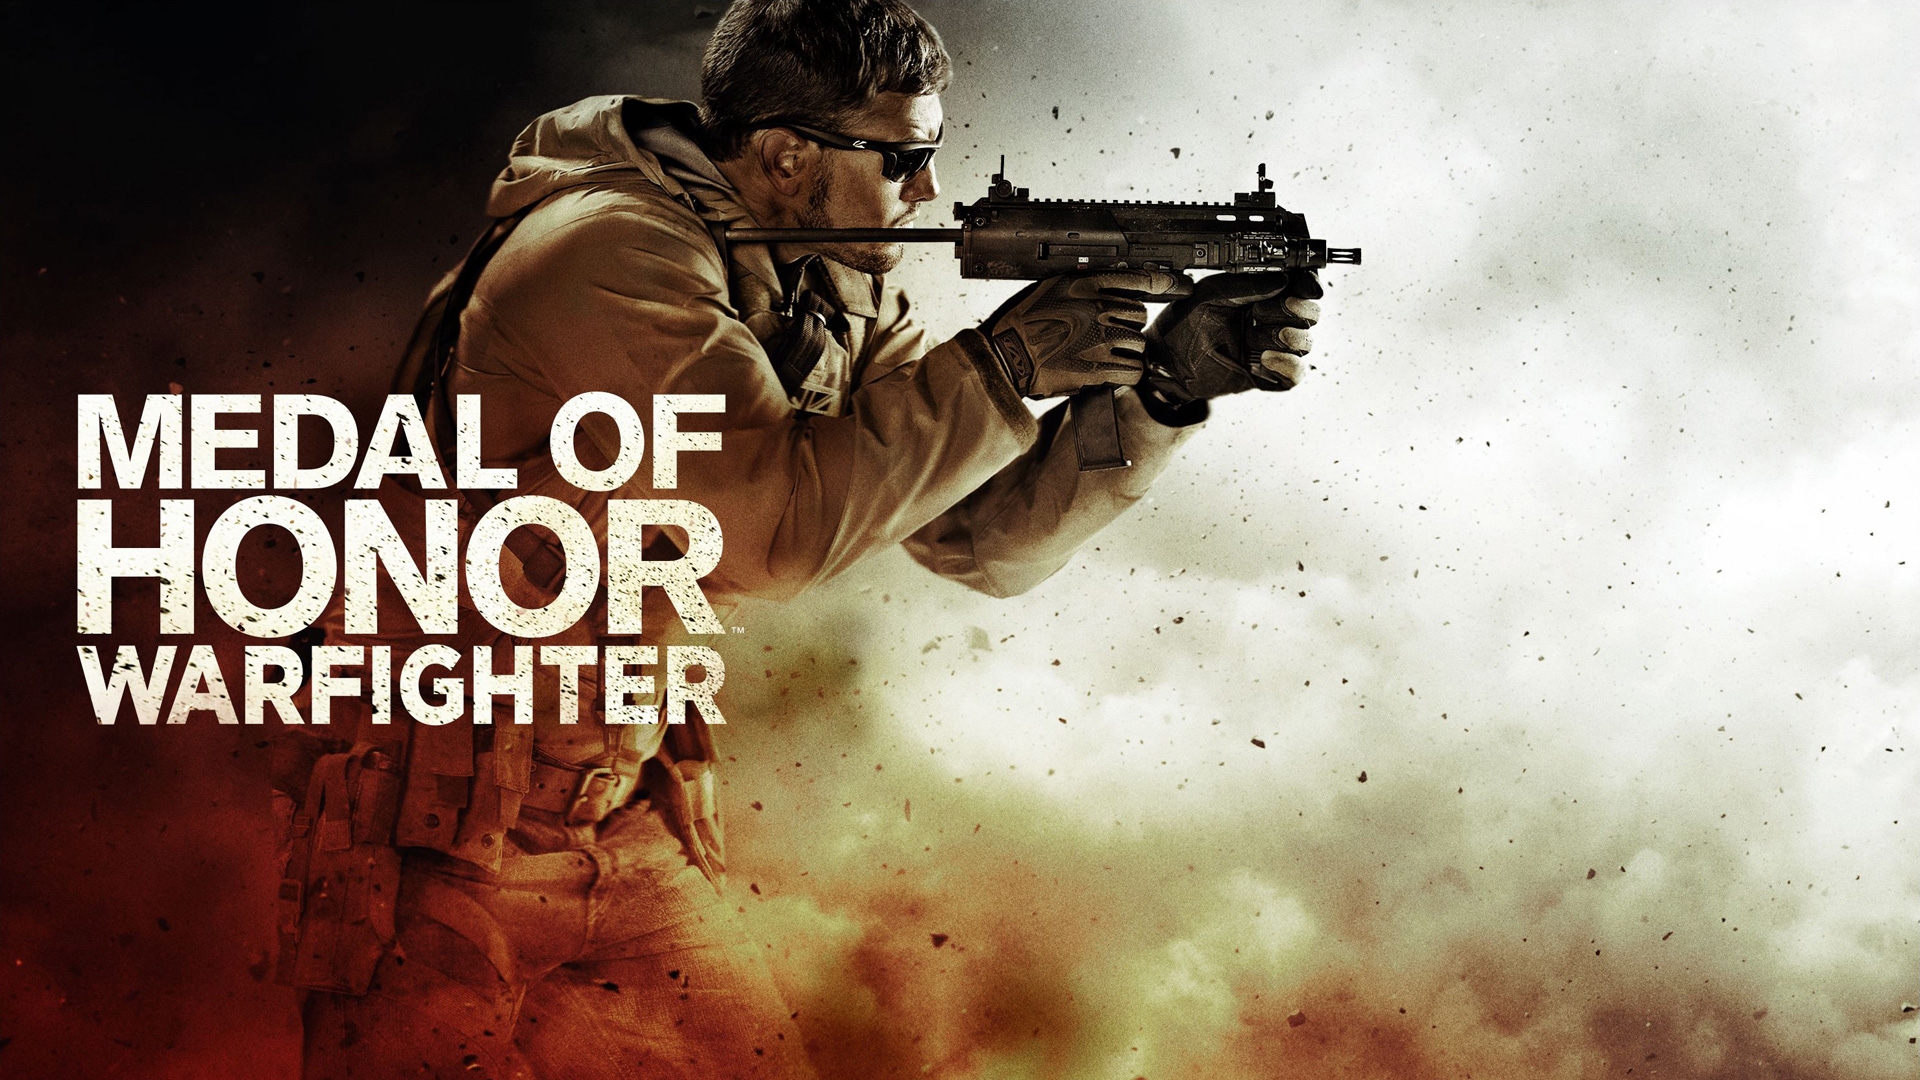 ... Medal of Honor Warfighter Wallpaper #2 by xKirbz